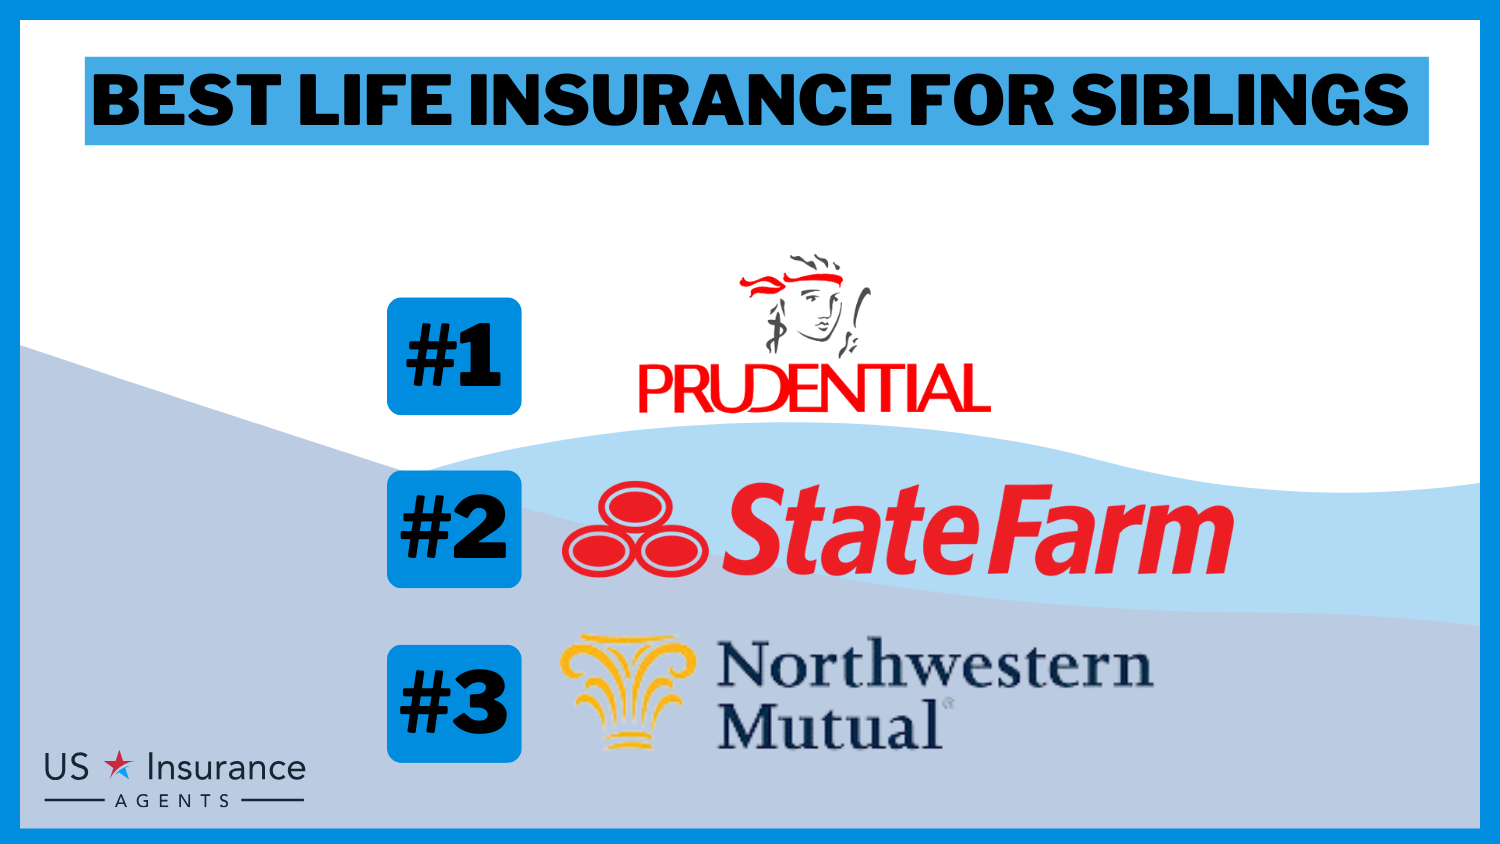 3 Best Life Insurance for Siblings: Prudential, State Farm, and Northwestern Mutual.